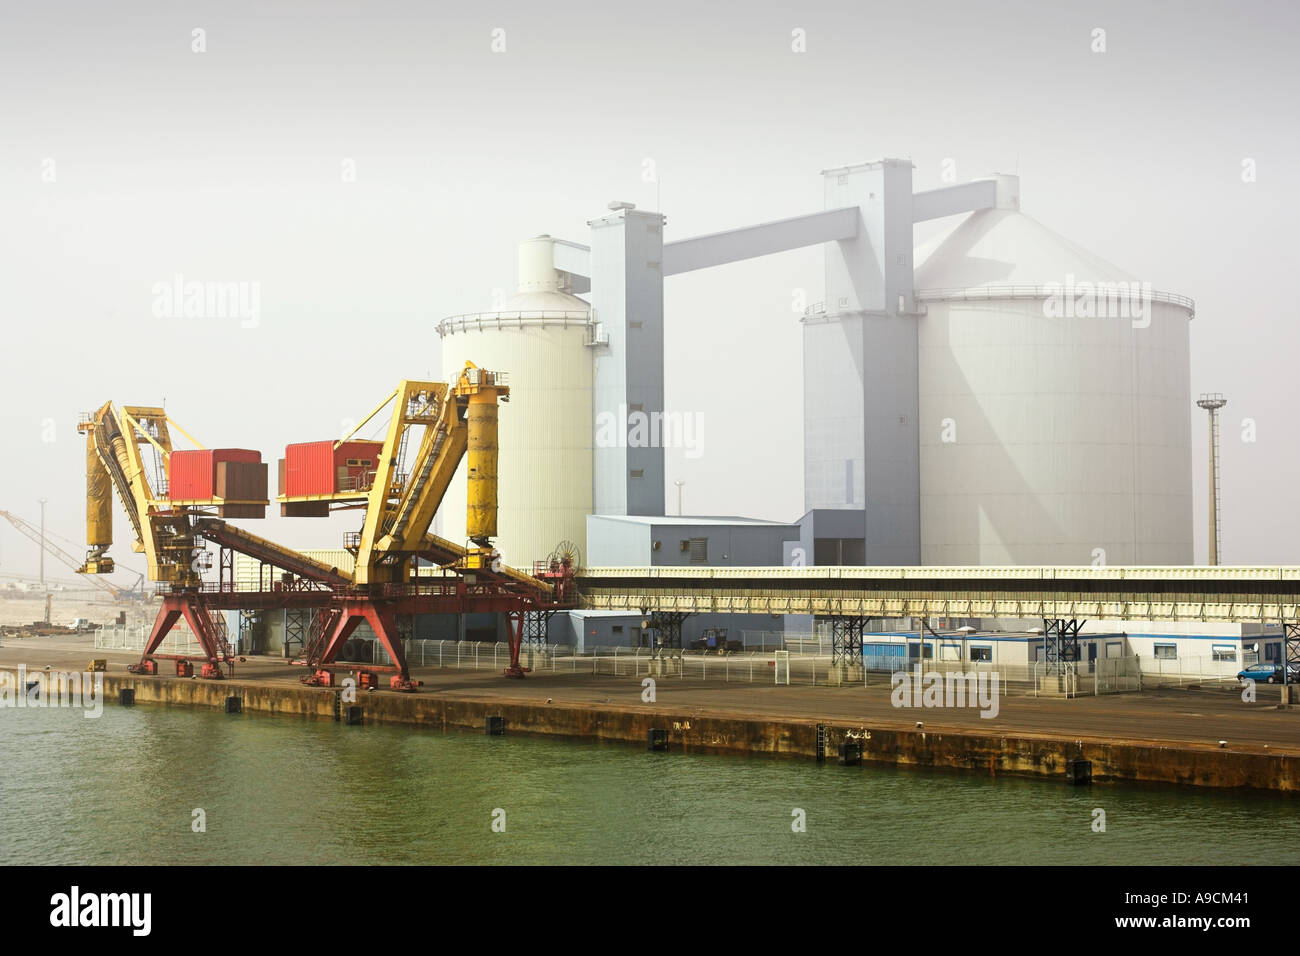 Cranes and silos at the Port of Calais, France, Europe Stock Photo